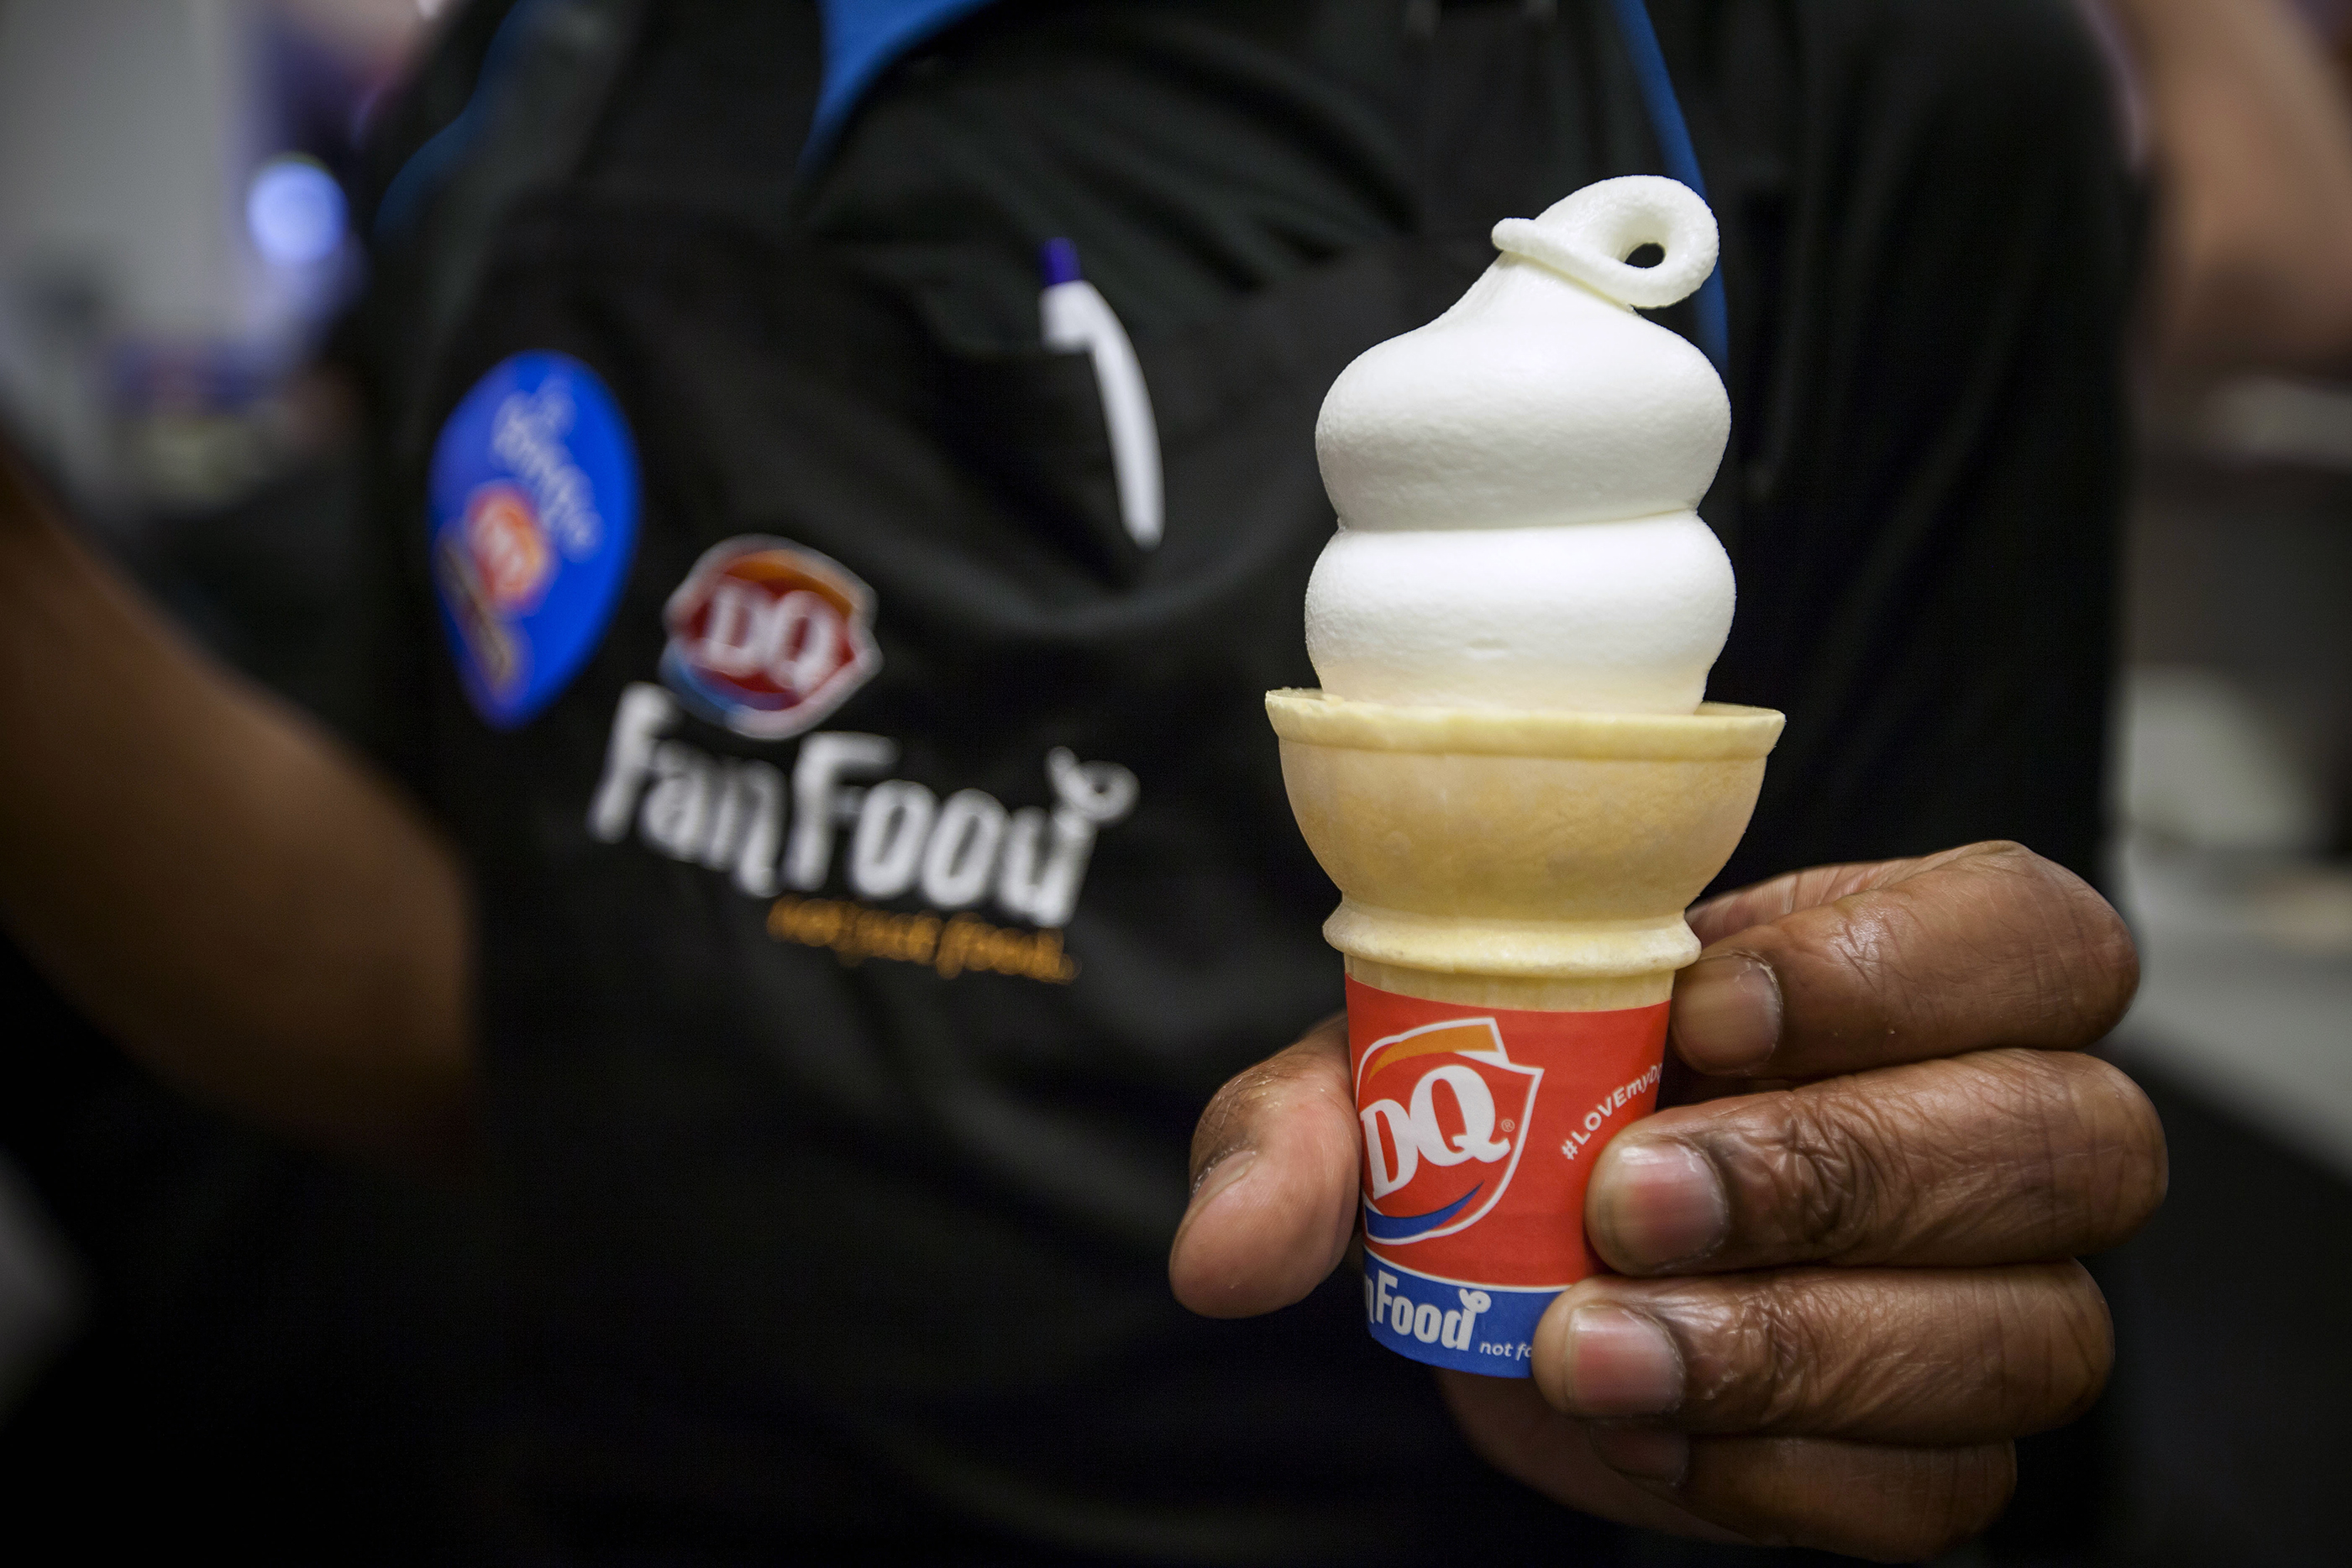 Inside Manhattan's First Dairy Queen Location Ahead of the Grand Opening